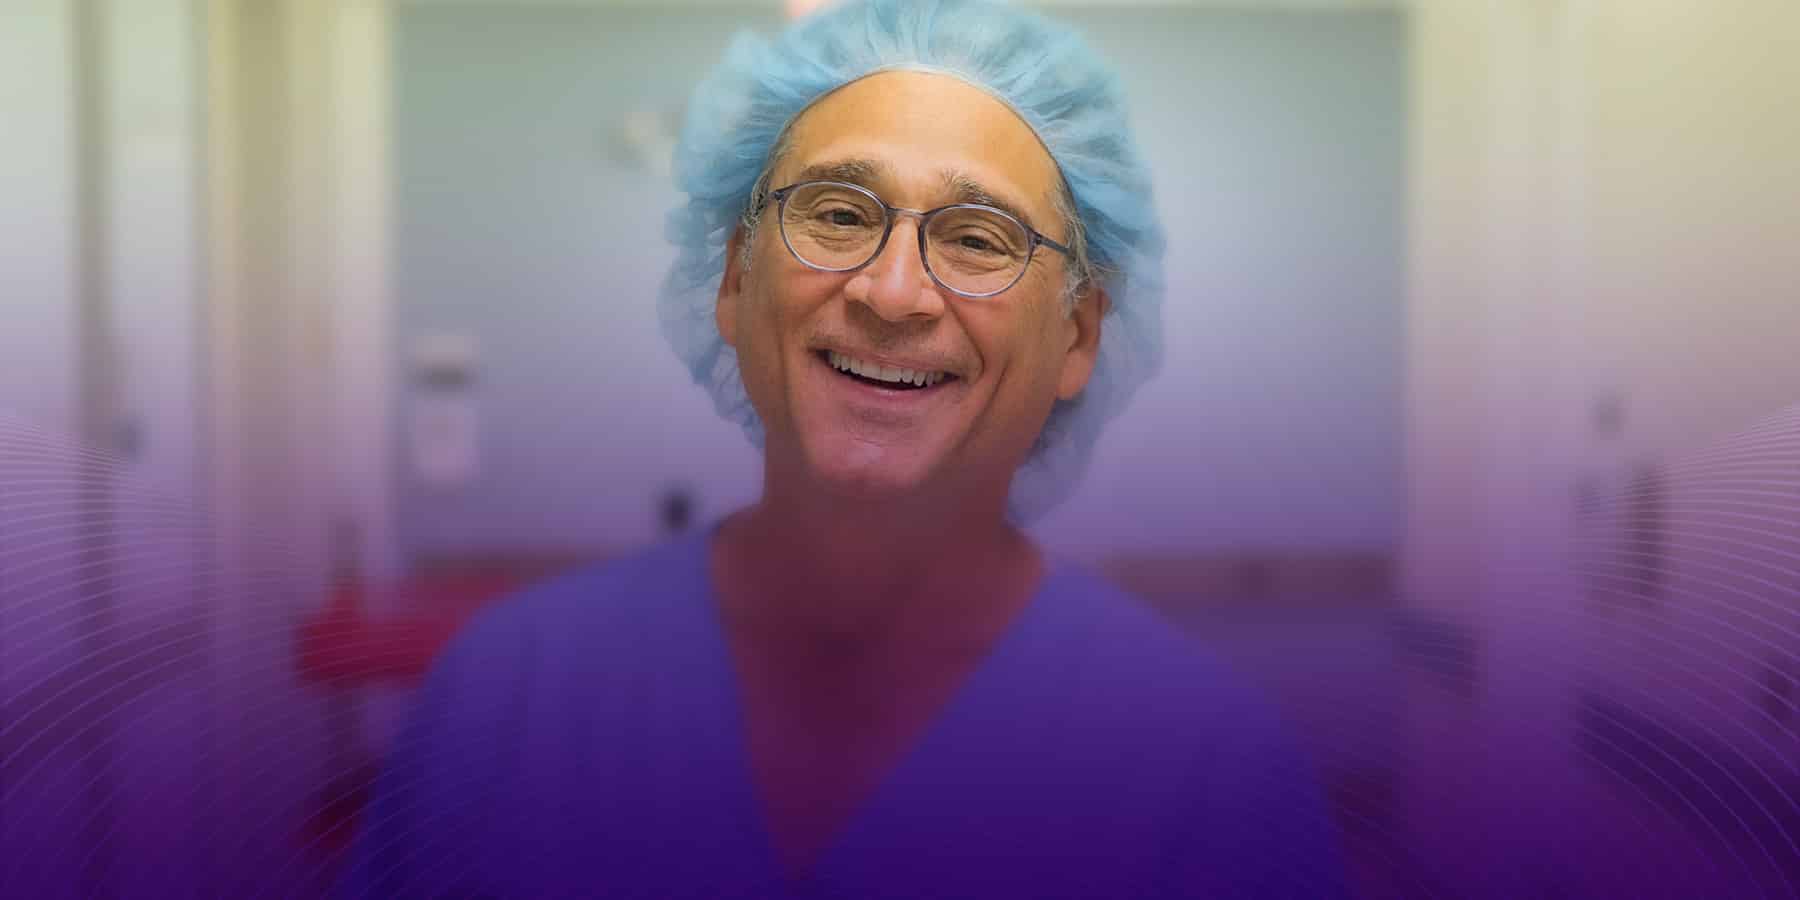 NYU male doctor smiling at the camera and standing in the hospital hall with his surgical cap on